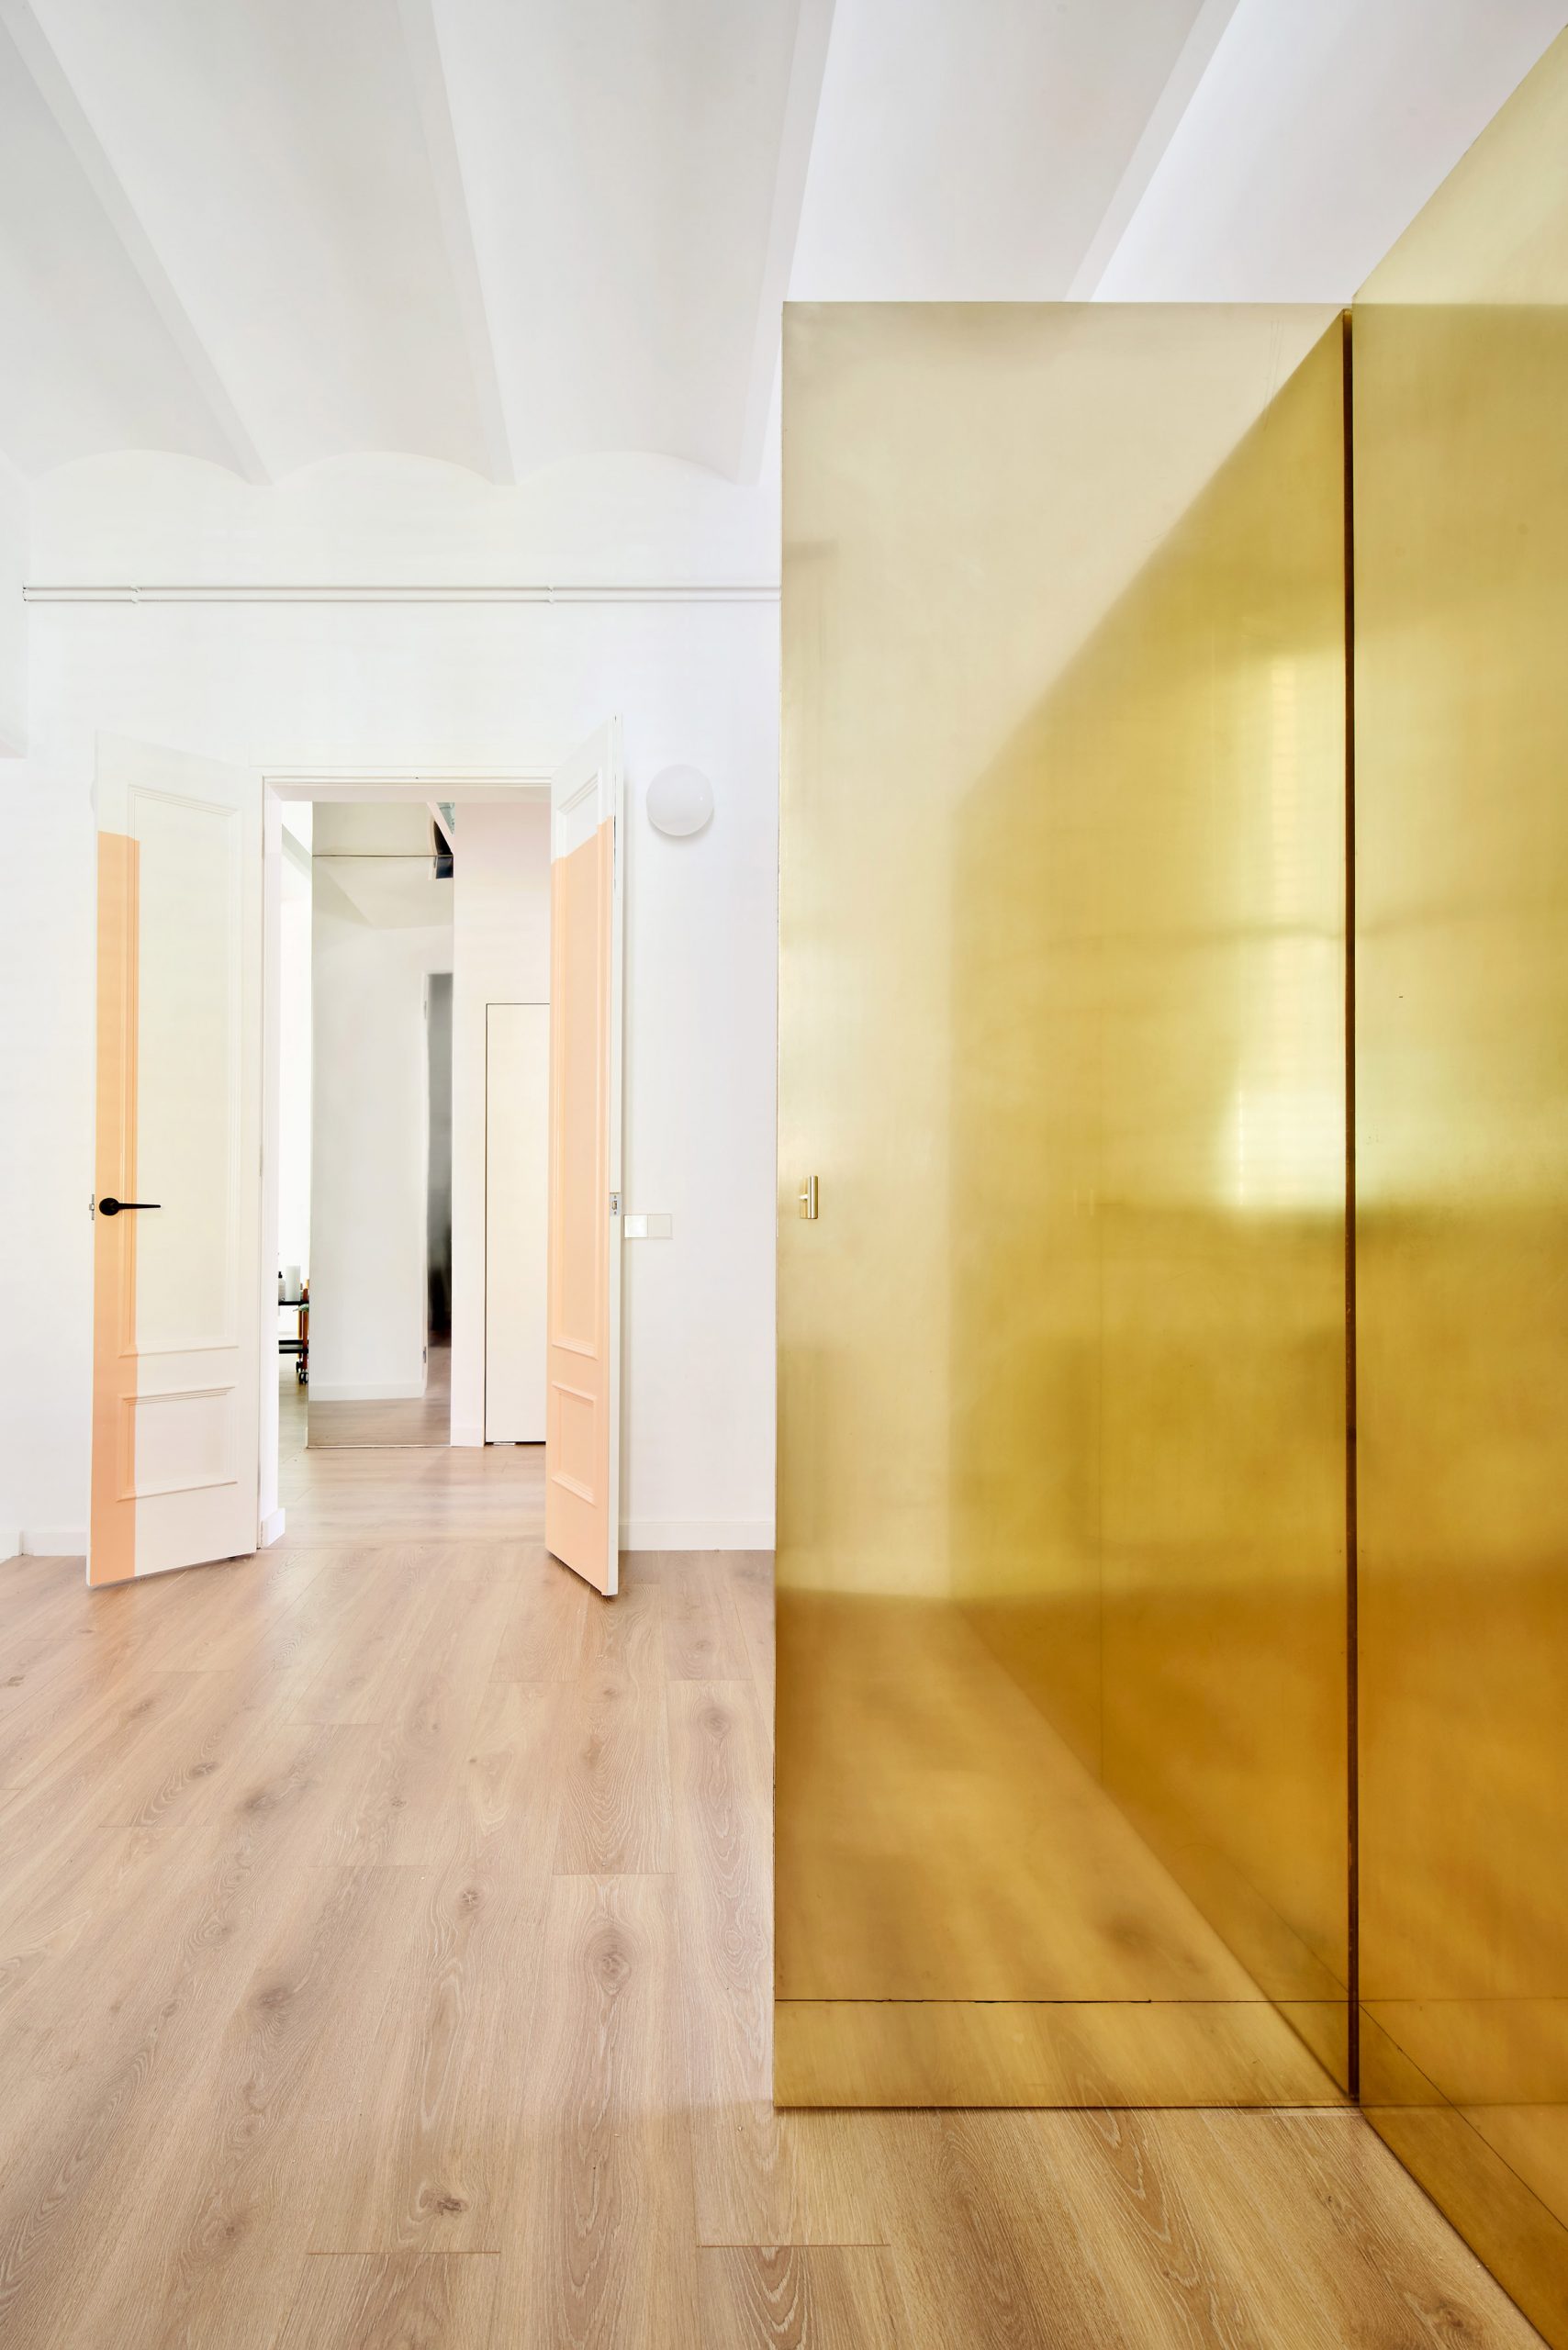 This wardrobe has a corridor inside it and it allows passing through it easily when needed